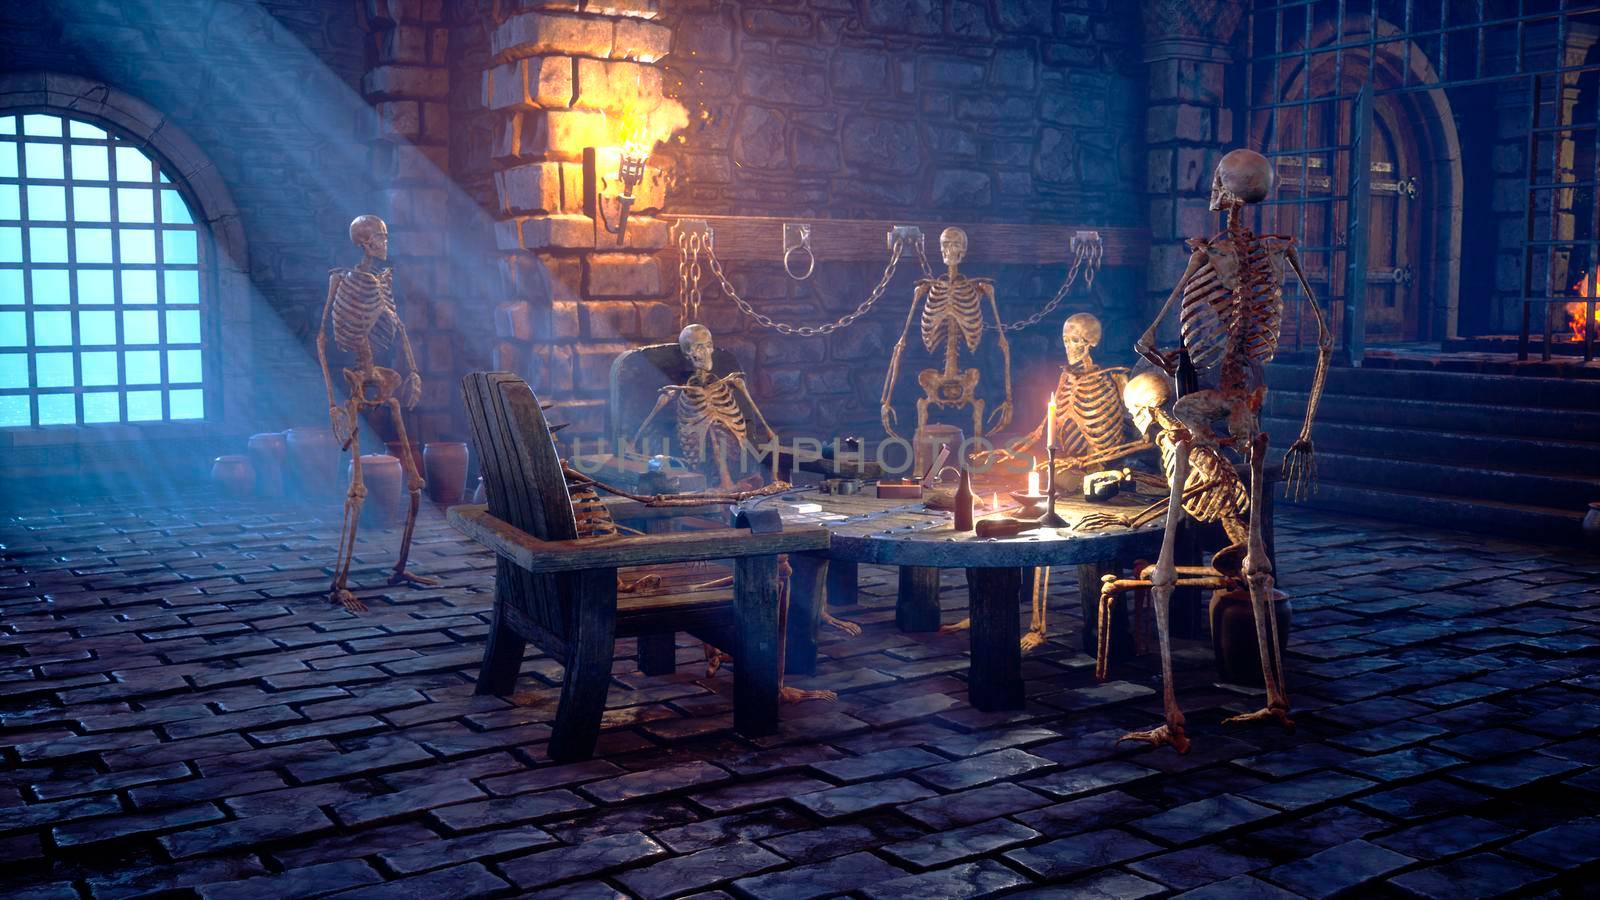 Party at the creepy skeletons in a mystical medieval dungeon. Mystical nightmare concept. View of the ancient catacomb and the old skeletons.